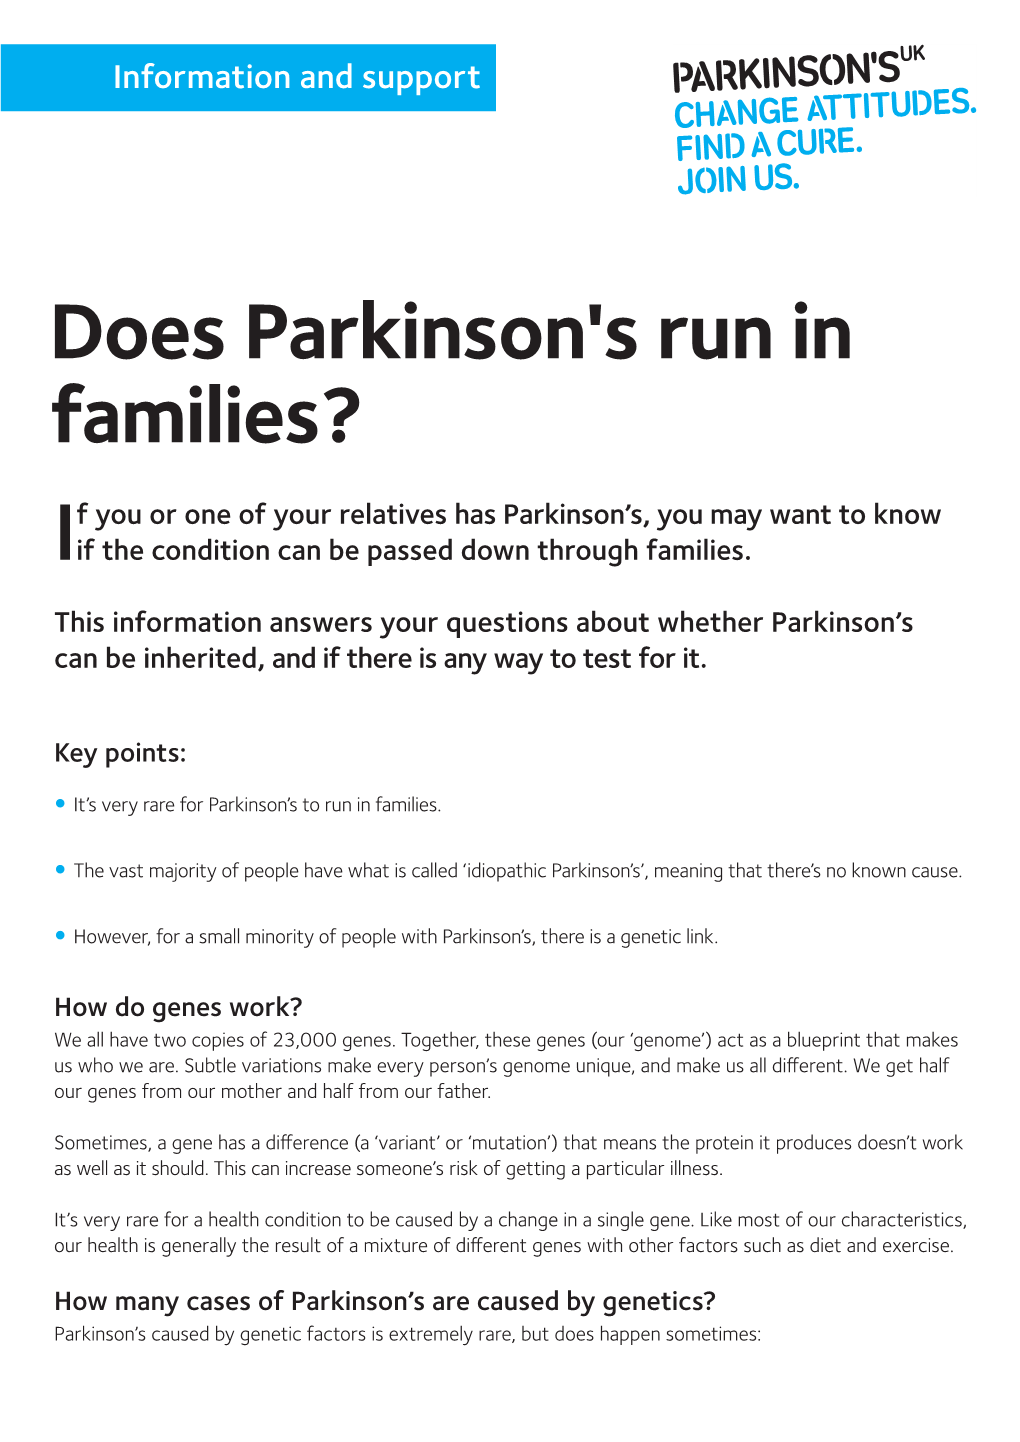 Does Parkinson's Run in Families?